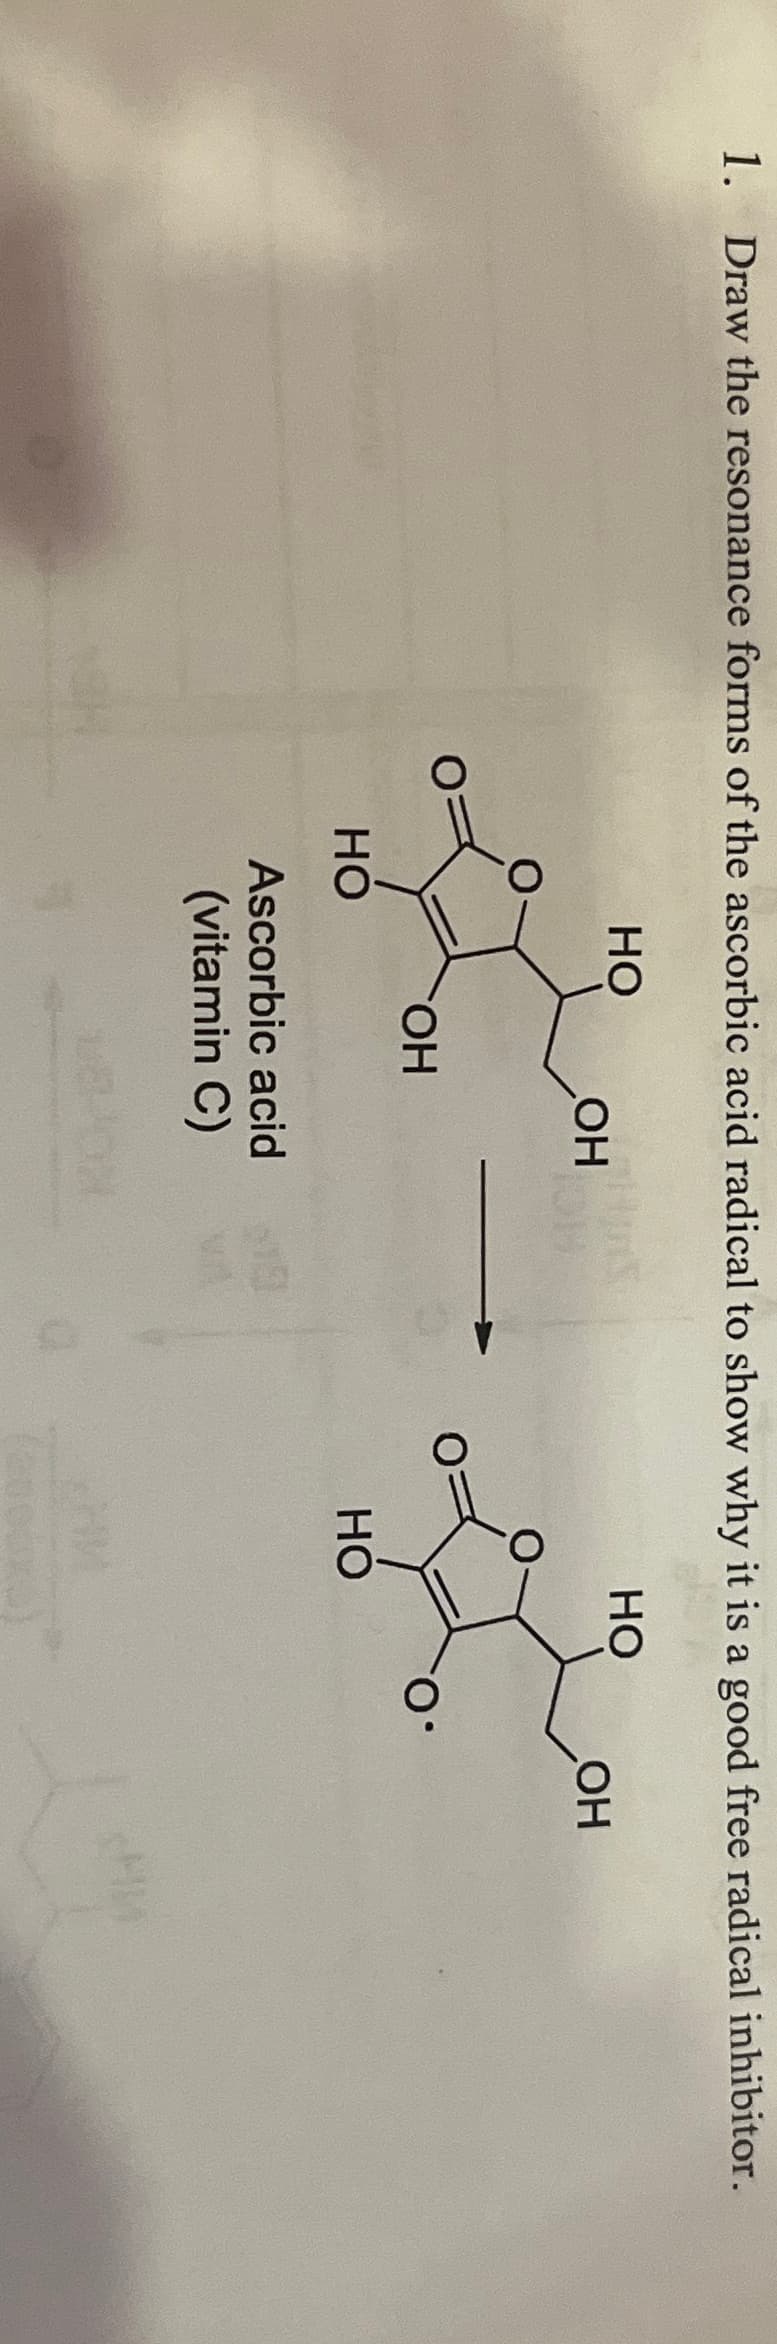 1. Draw the resonance forms of the ascorbic acid radical to show why it is a good free radical inhibitor.
HO
OH
HO
OH
HO
OH
Ascorbic acid
(vitamin C)
O
HO
НИ